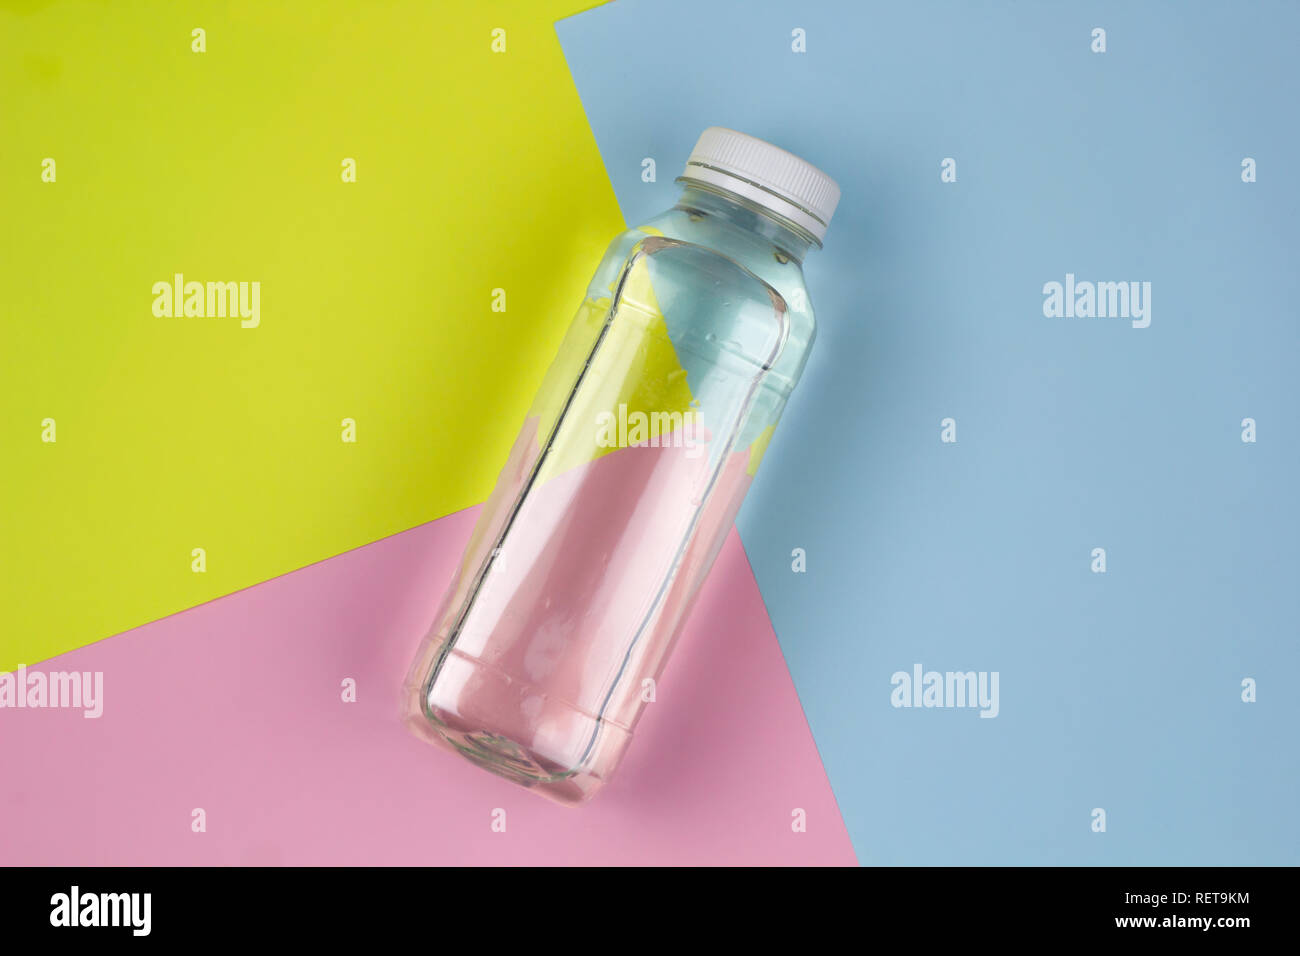 top view flat lay water bottle on a vibrant background Stock Photo